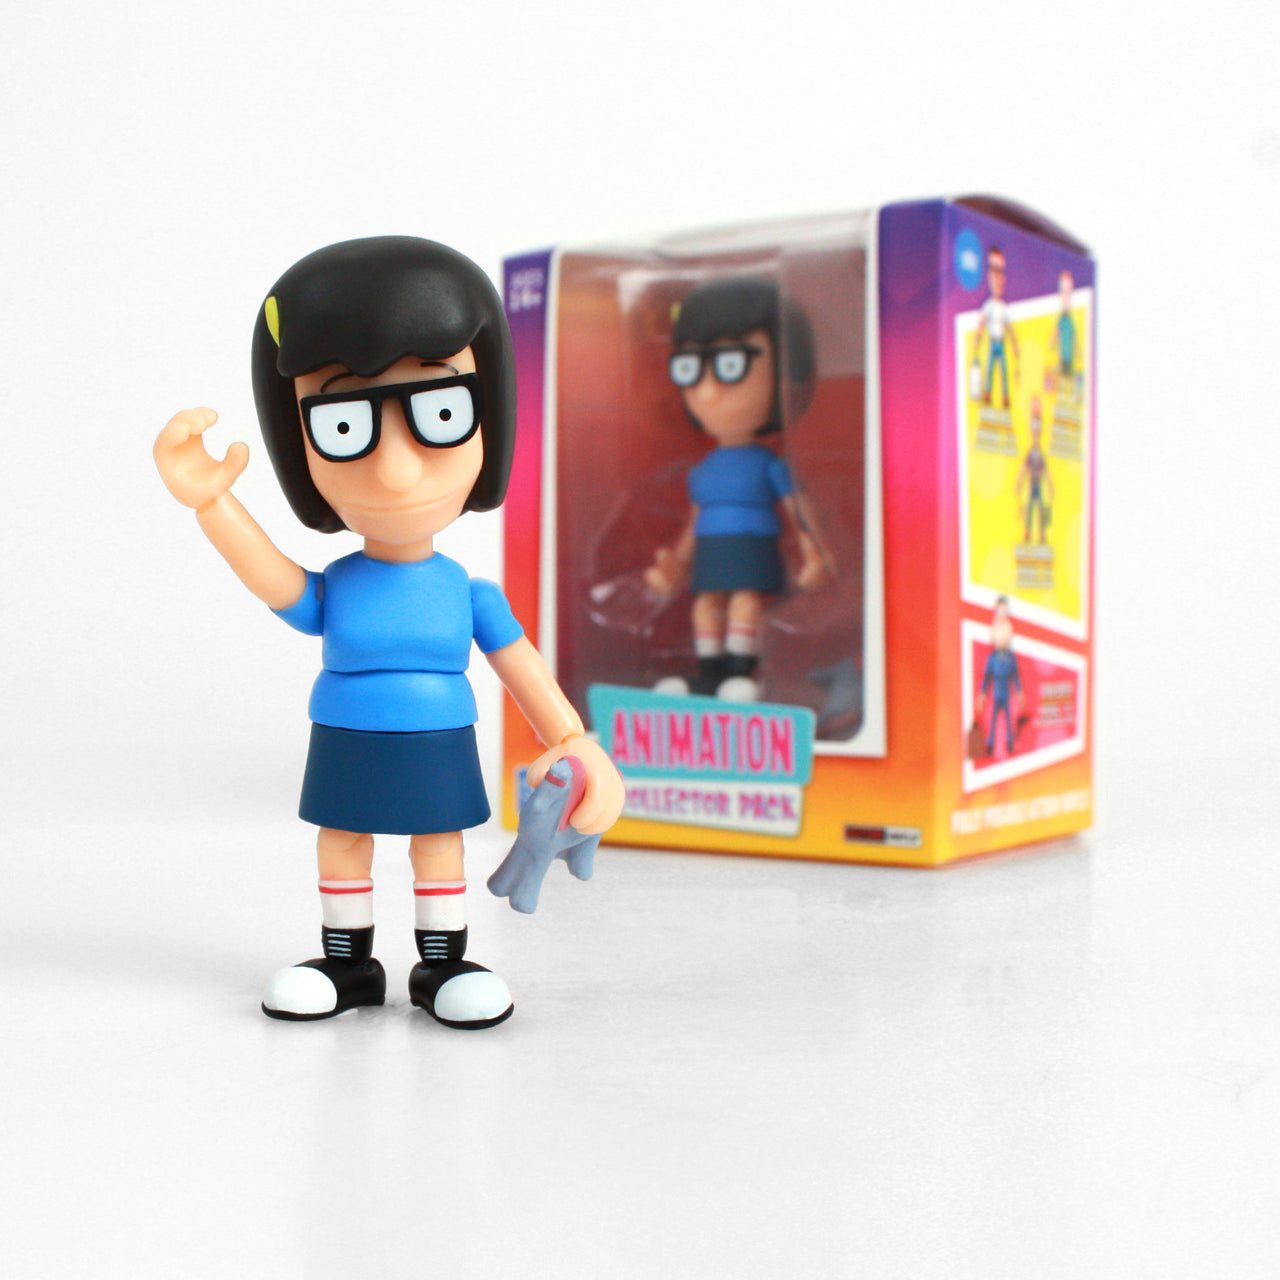 The Loyal Subjects - Bob's Burgers Tina Belcher with Toy Horse